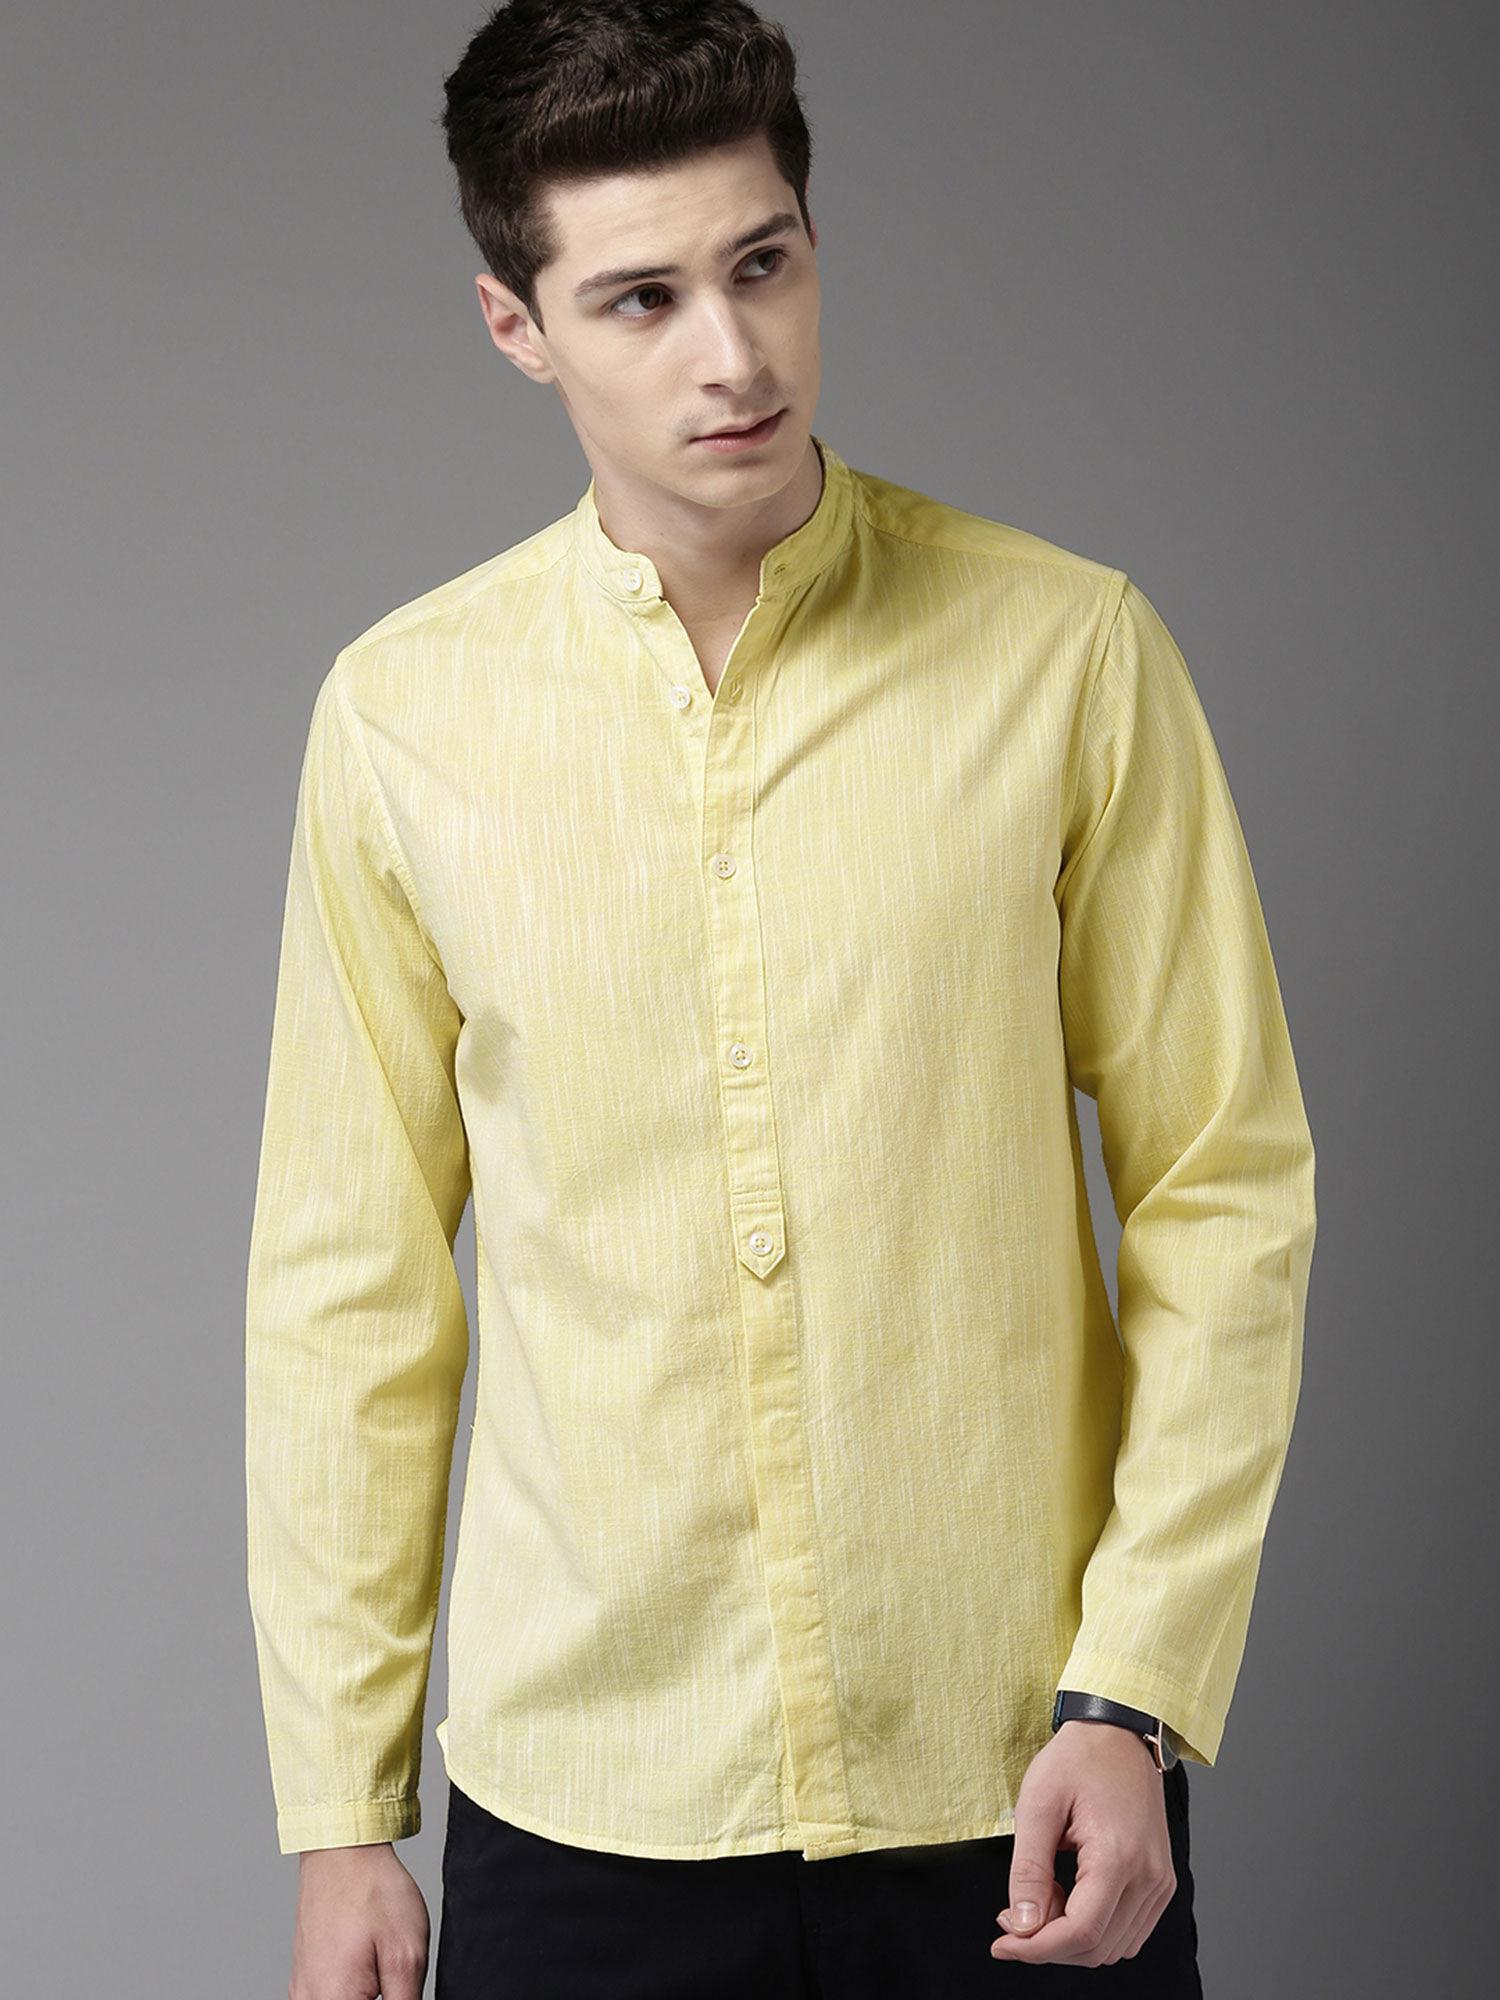 men's solid slim fit long sleeves yellow shirt